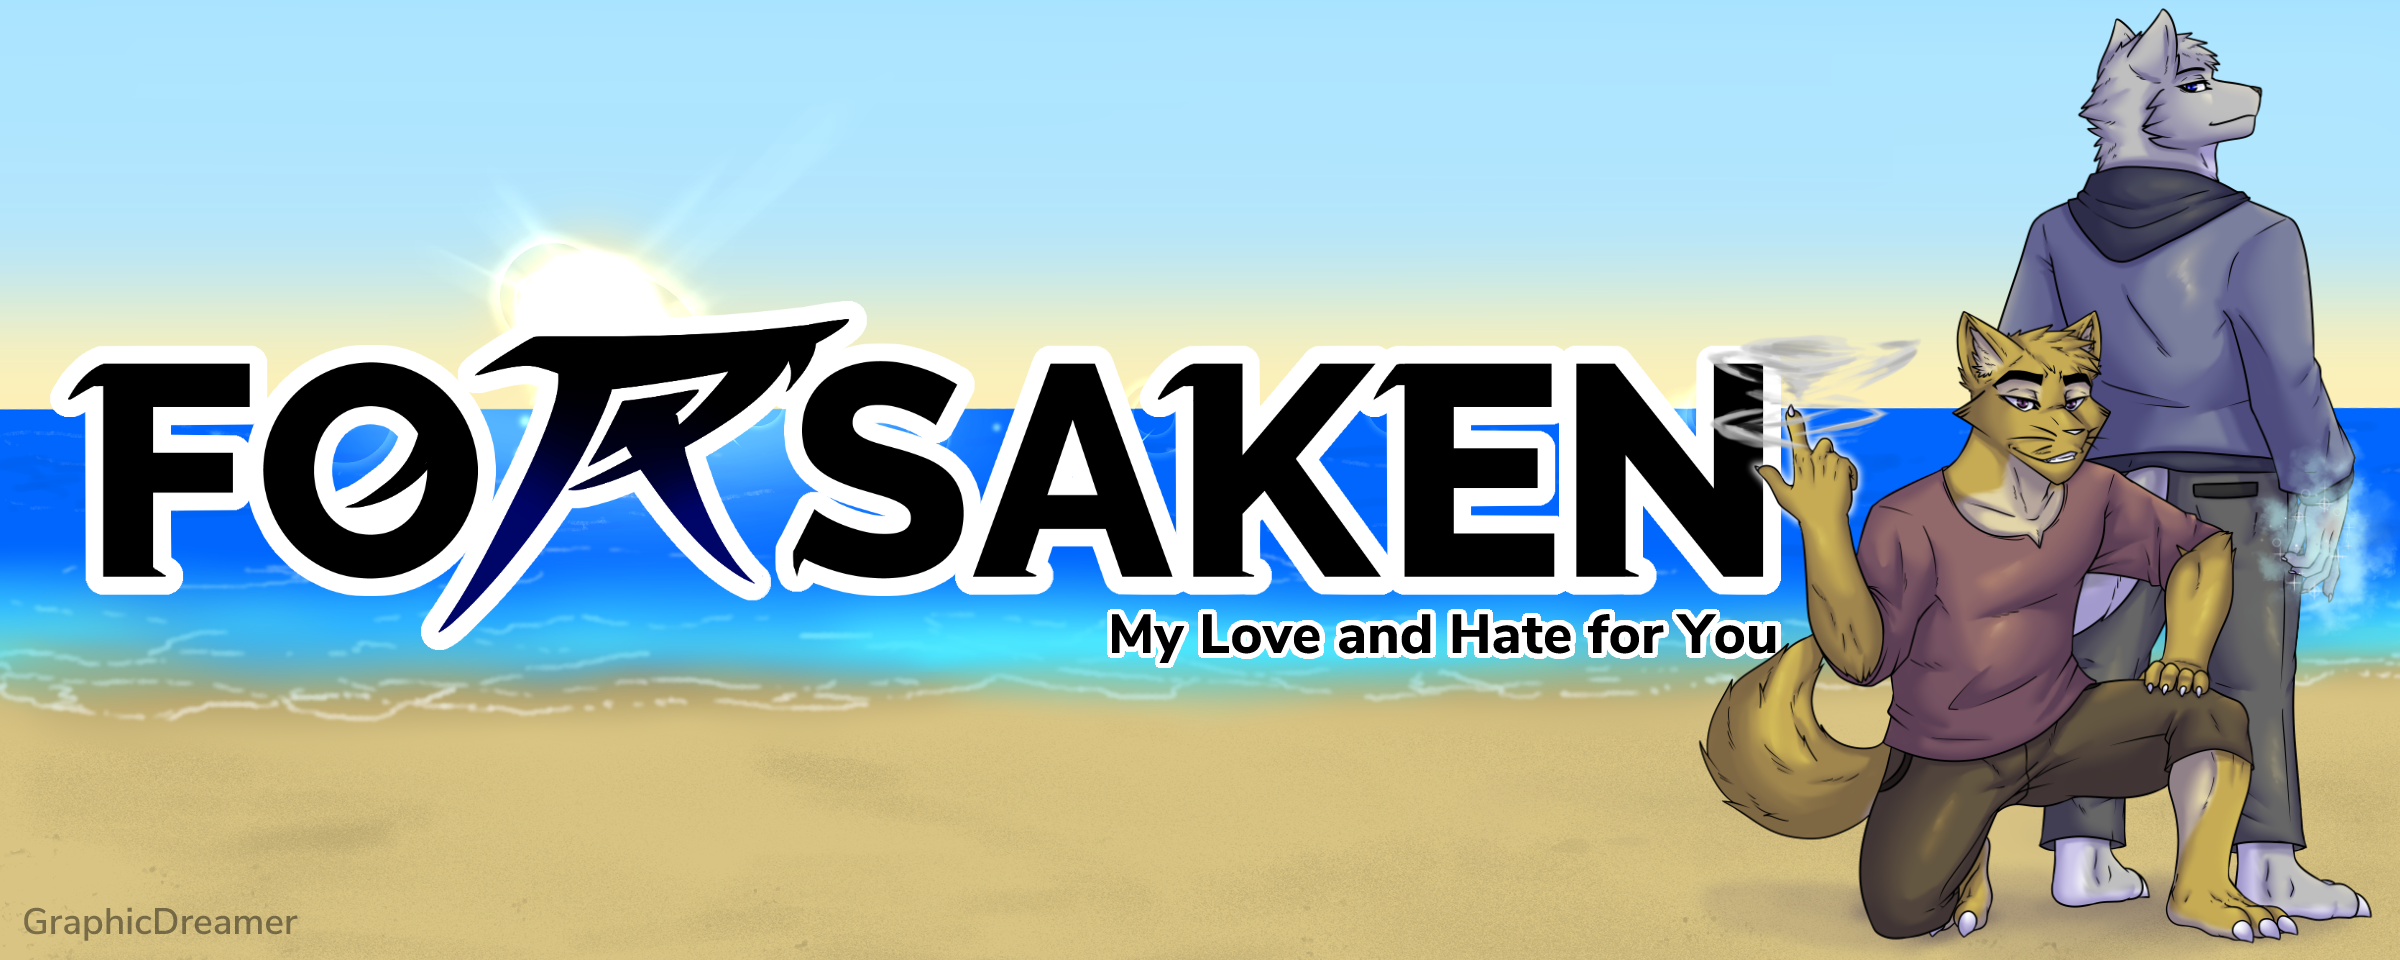 Forsaken: My Love and Hate For You